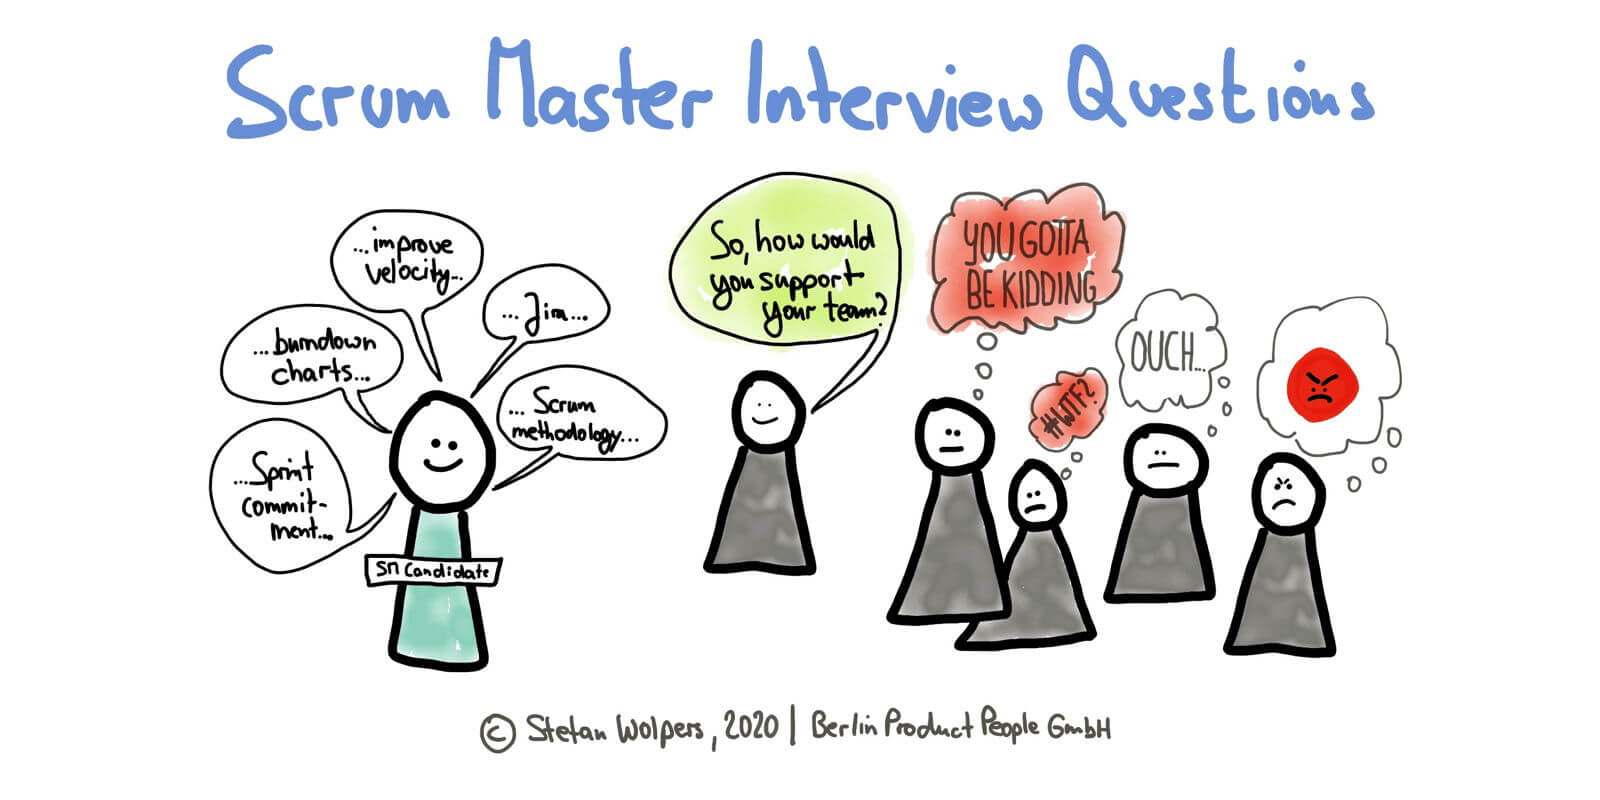 66 Scrum Master Interview Questions to Identify Suitable Candidates — Age-of-Product.com